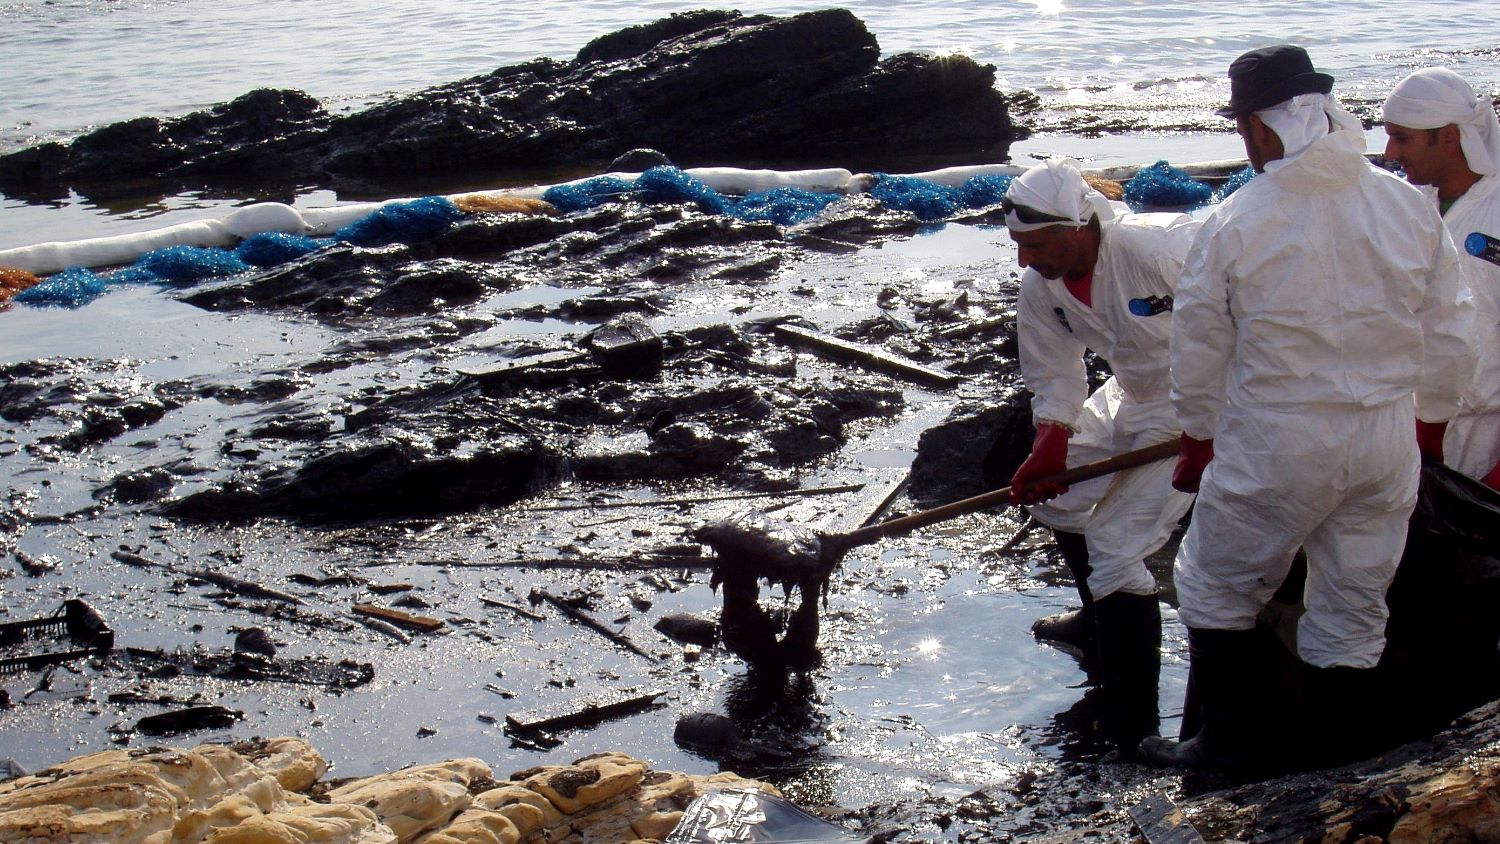 How will we deal with oil spills in the future?